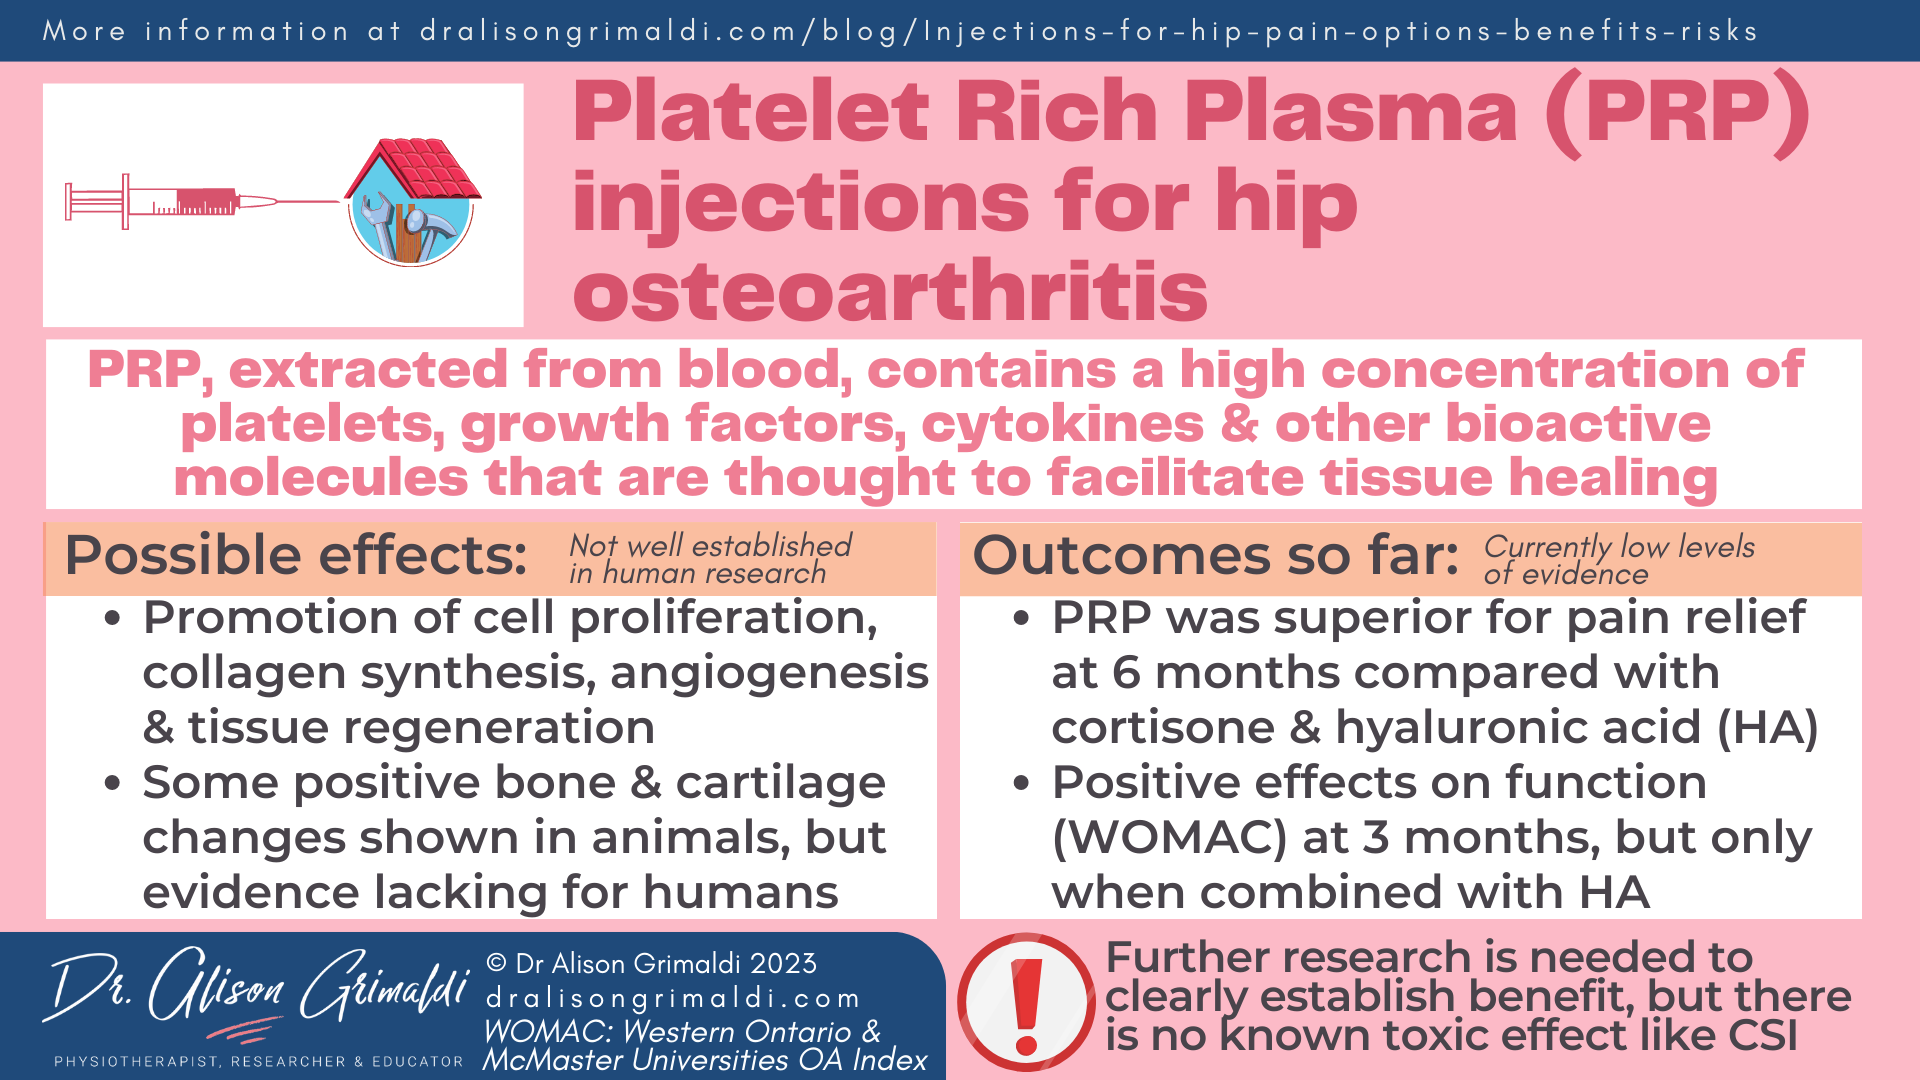 Platelet Rich Plasma (PRP) injections for hip osteoarthritis